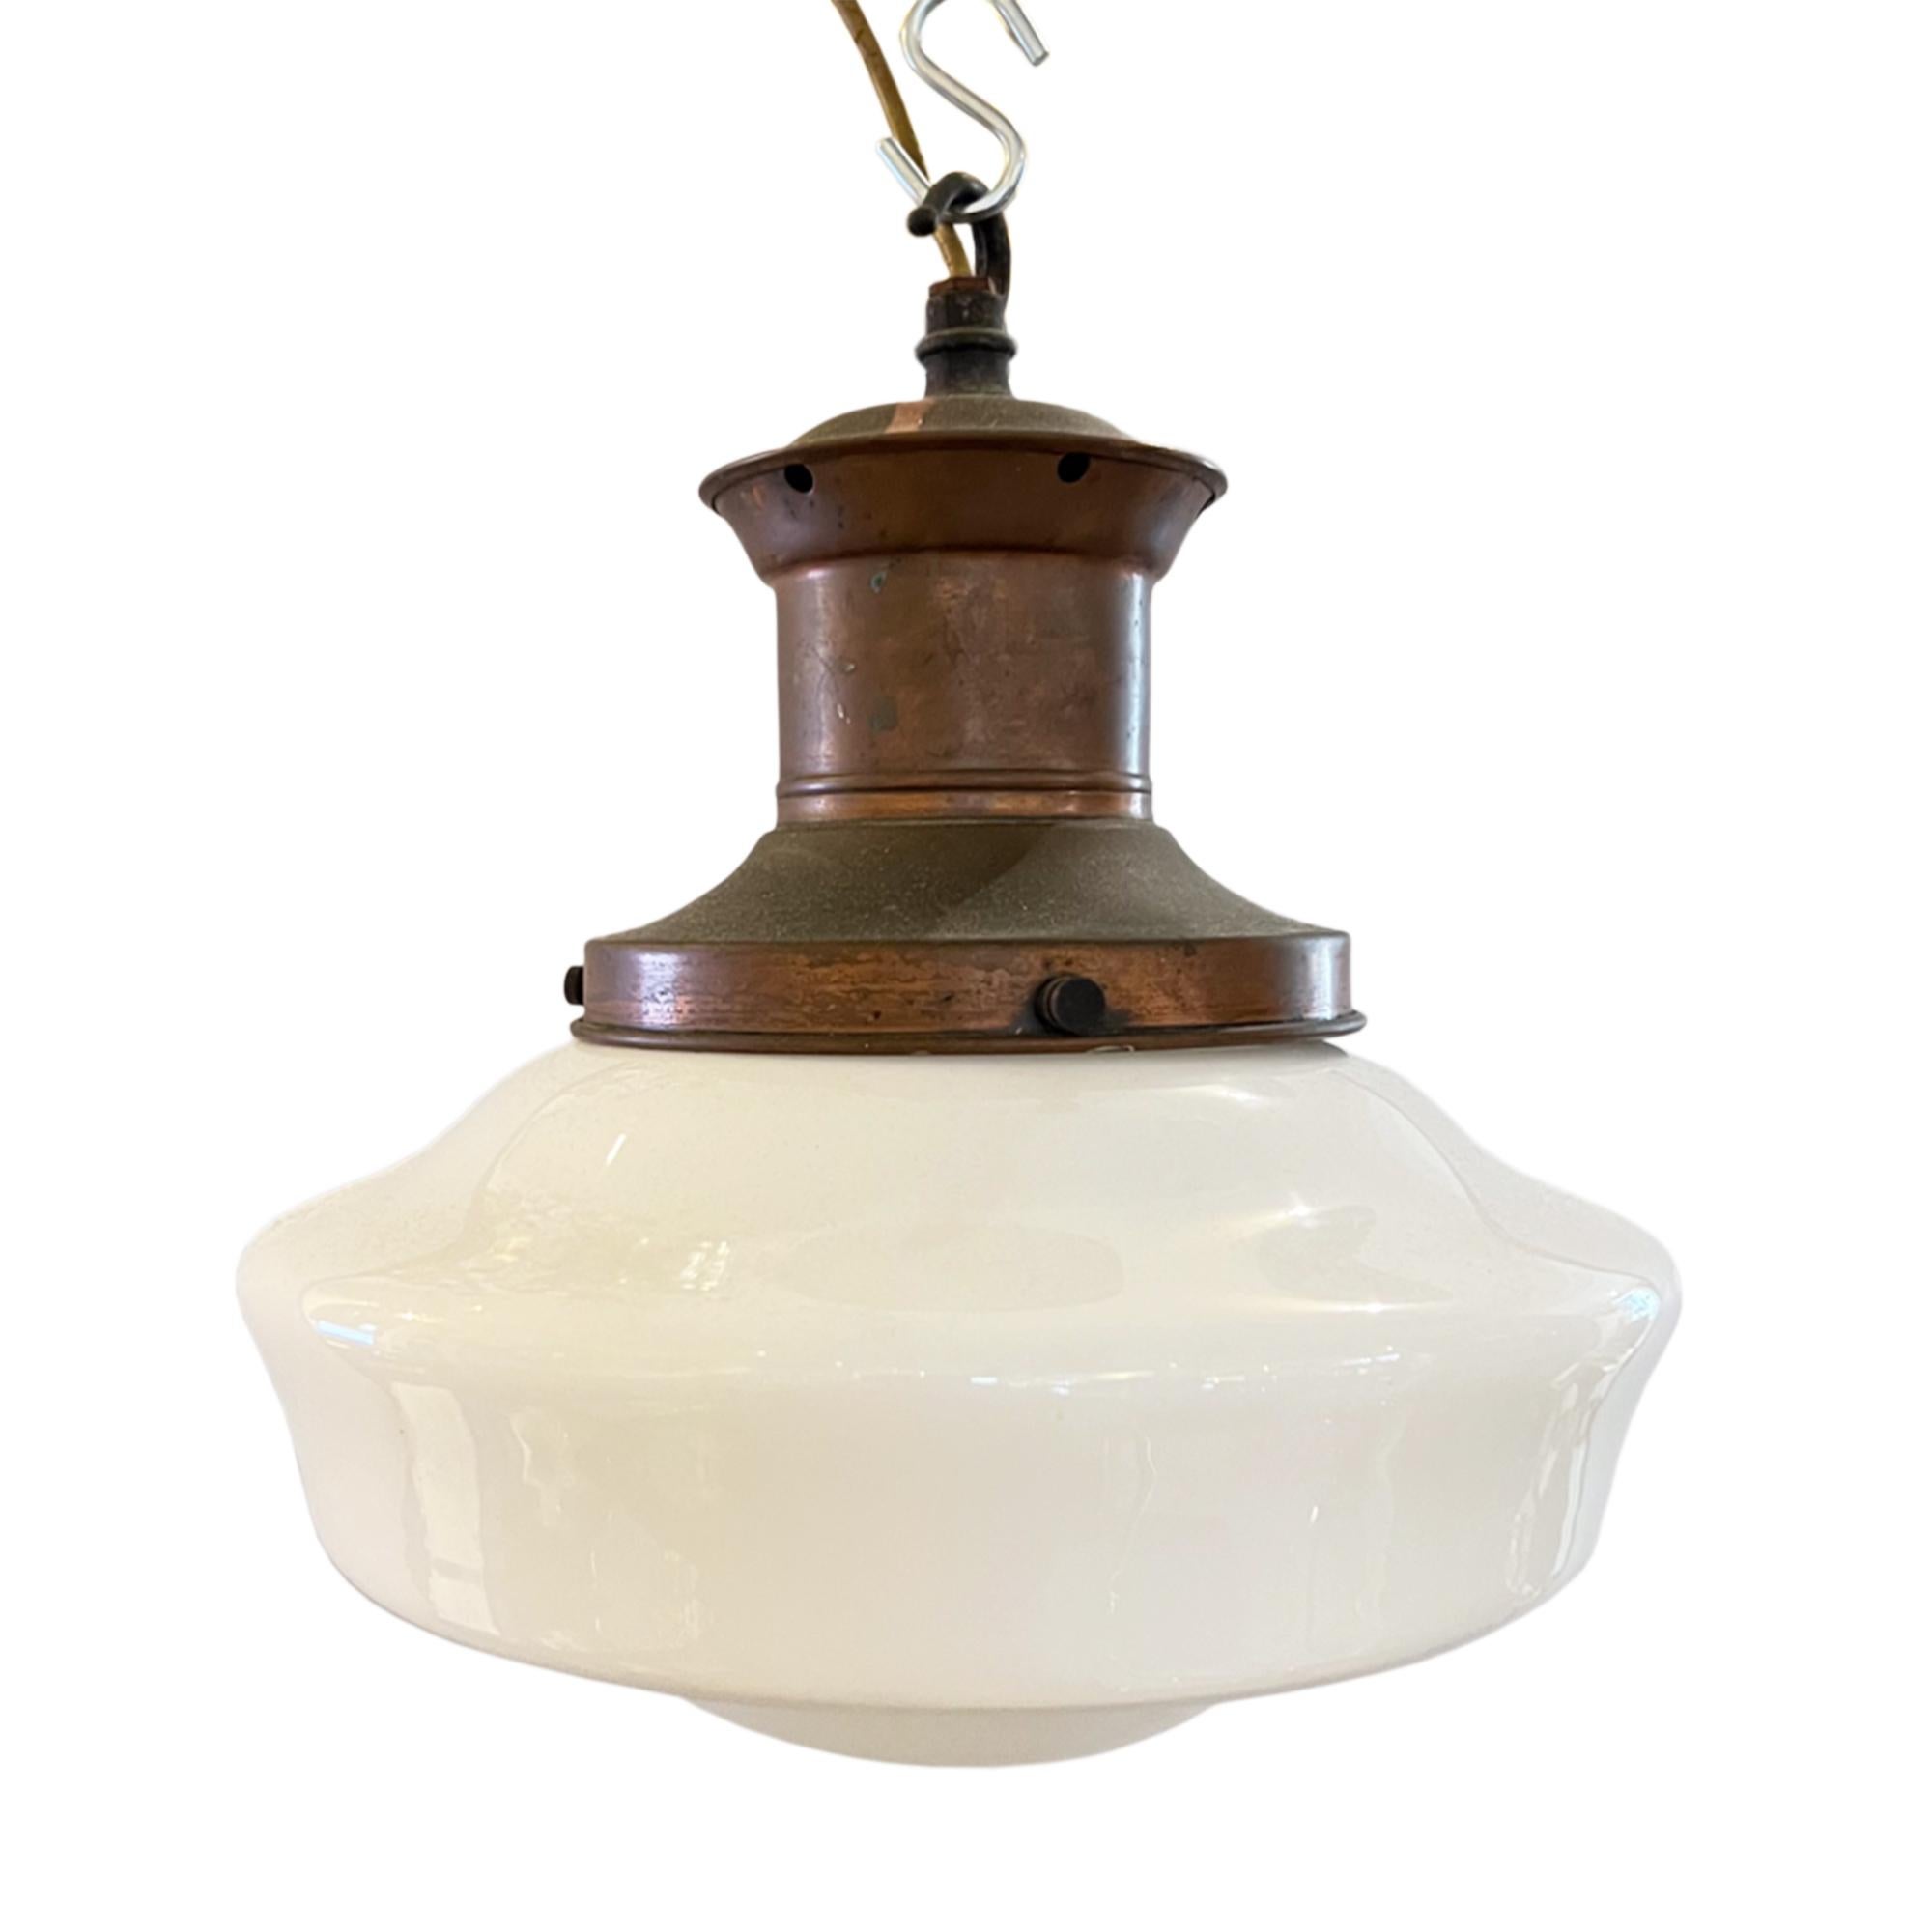 We have several of these classic English pendant lights please take a look at our website or get in touch for more information. 

There are 3 of this particular style and we also have a similar one in a slightly bigger size. 

Made using a simple